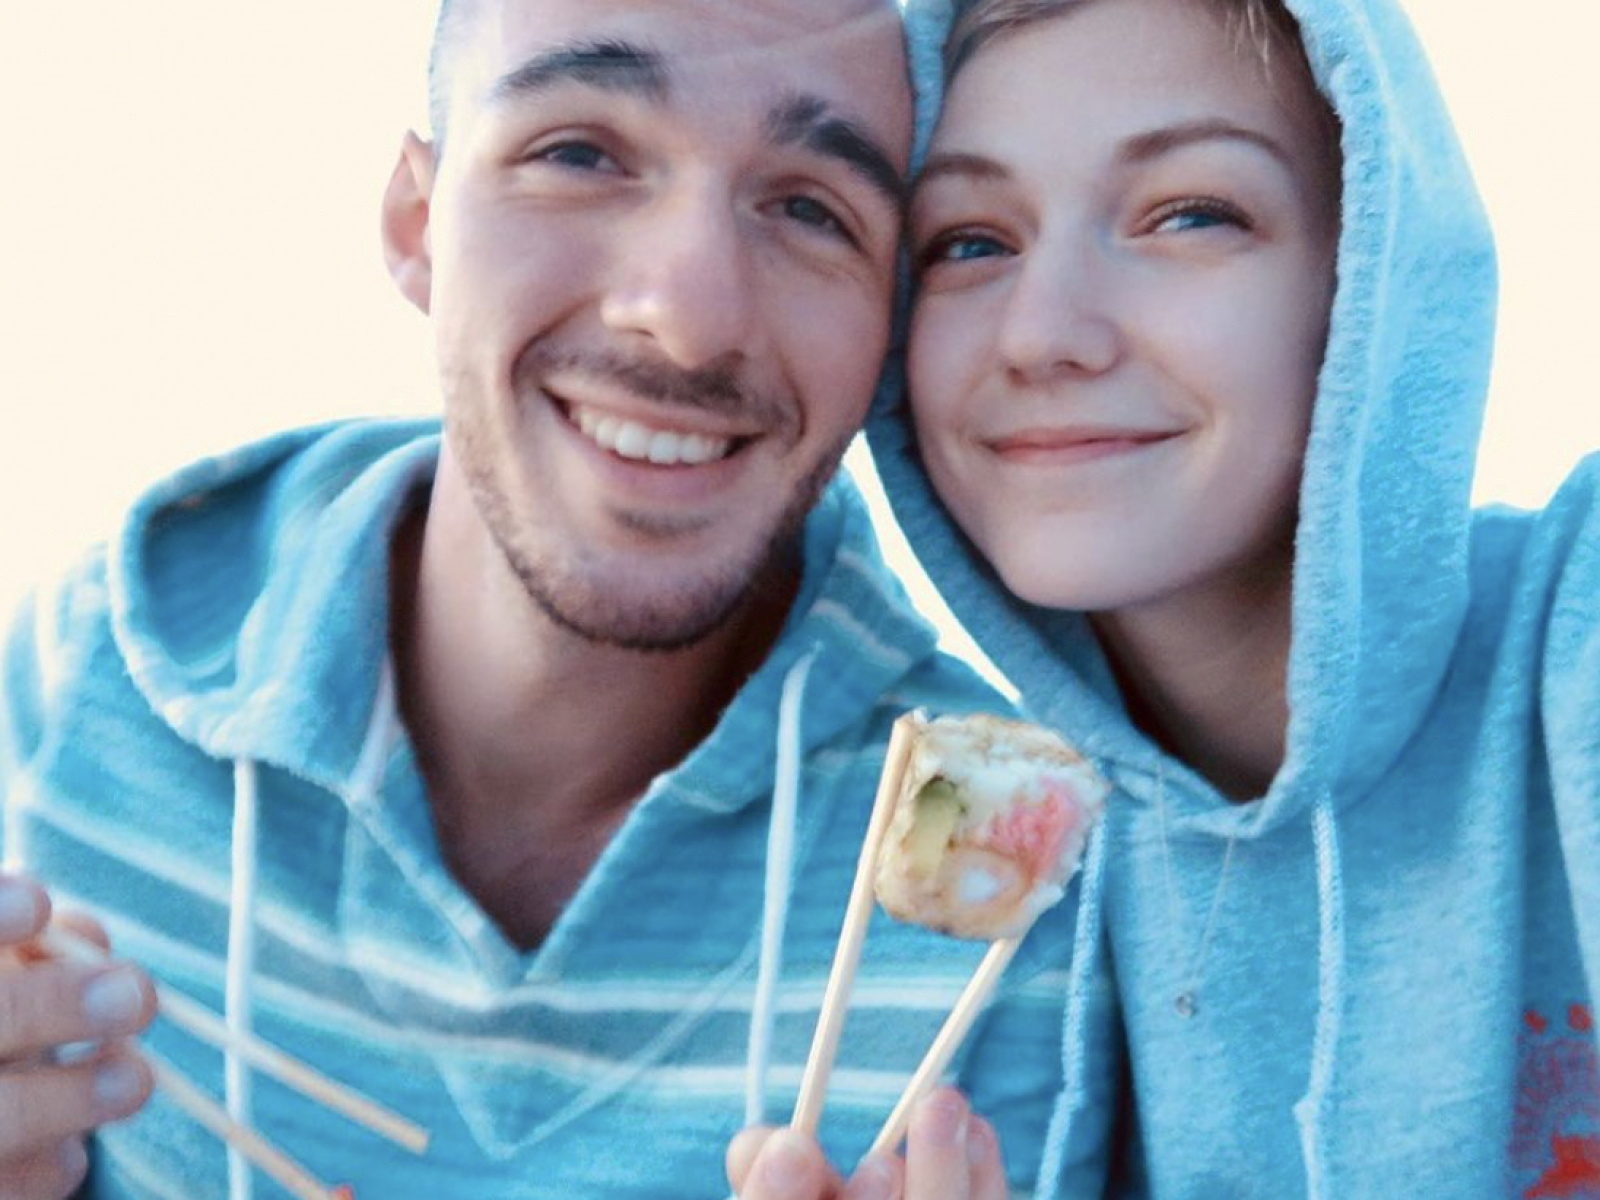 Gabrielle Petito, 22, who was reported missing on Sept. 11, 2021 after traveling with her boyfriend around the country in a van and never returned home, poses for a photo with Brian Laundrie in this undated handout photo.  North Port/Florida Police/Handout via REUTERS/